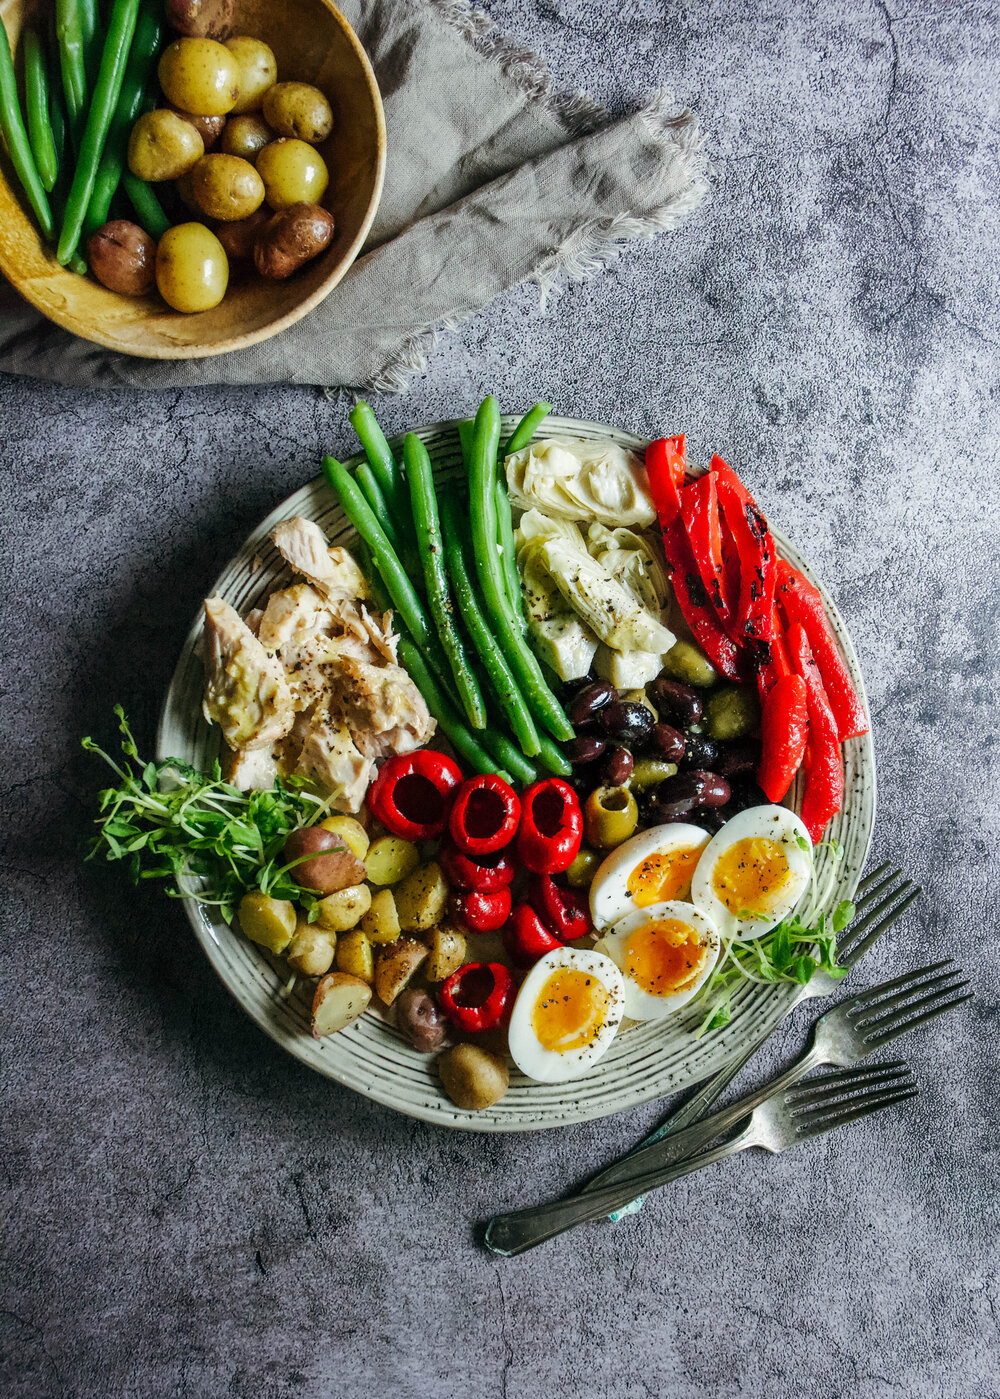 soft boiled eggs, cooked potatoes, tuna, beans, red peppers, olives on a plate